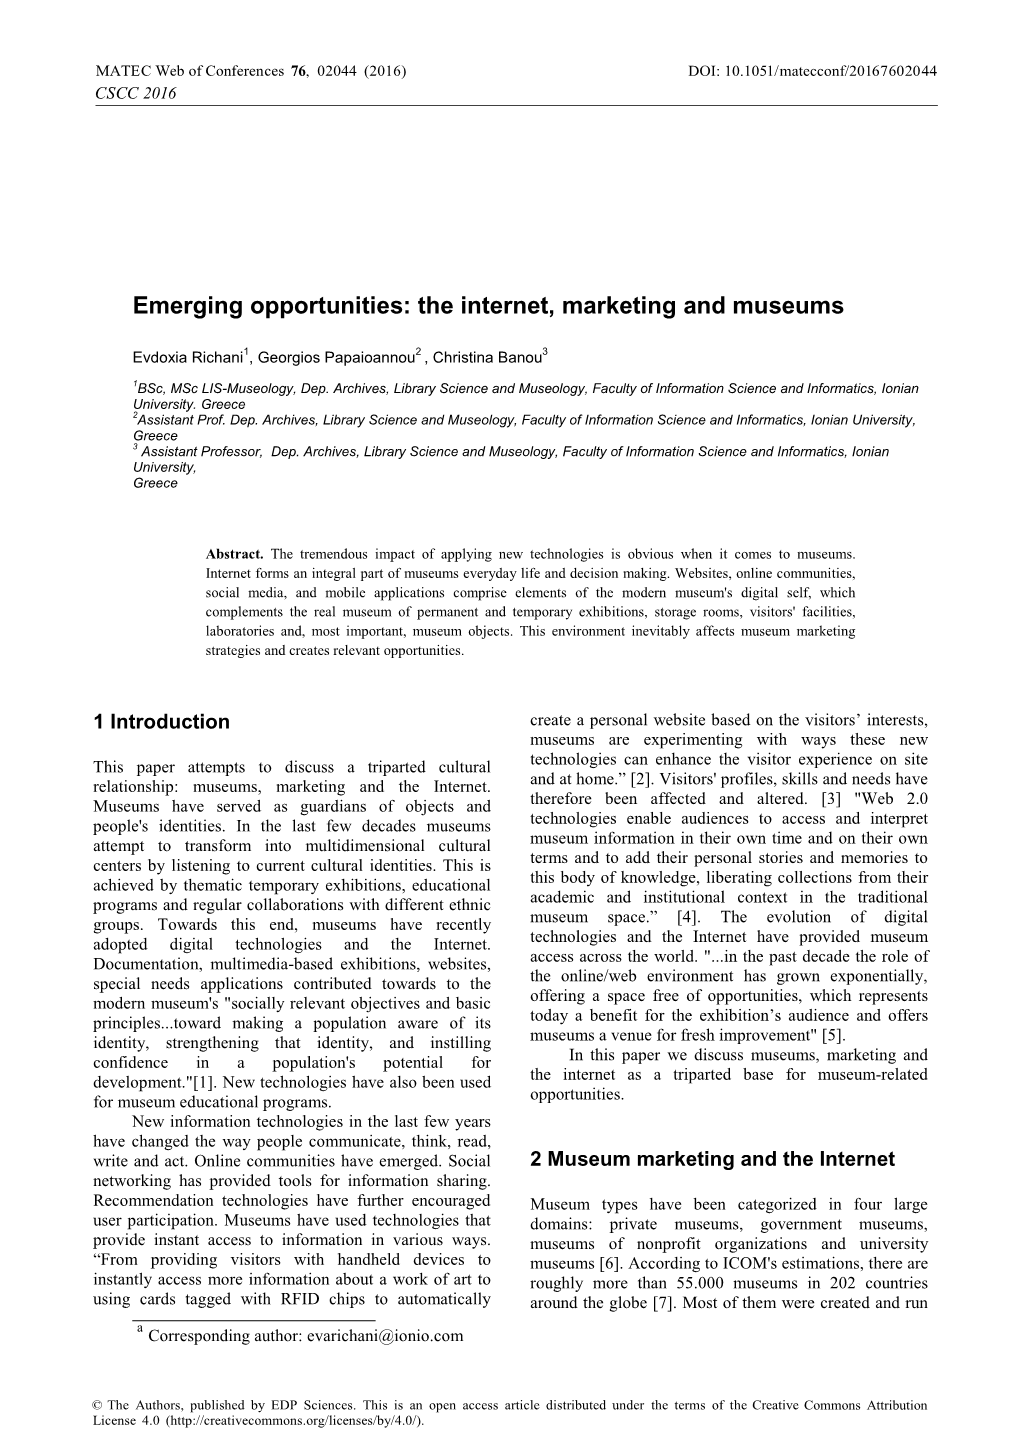 The Internet, Marketing and Museums